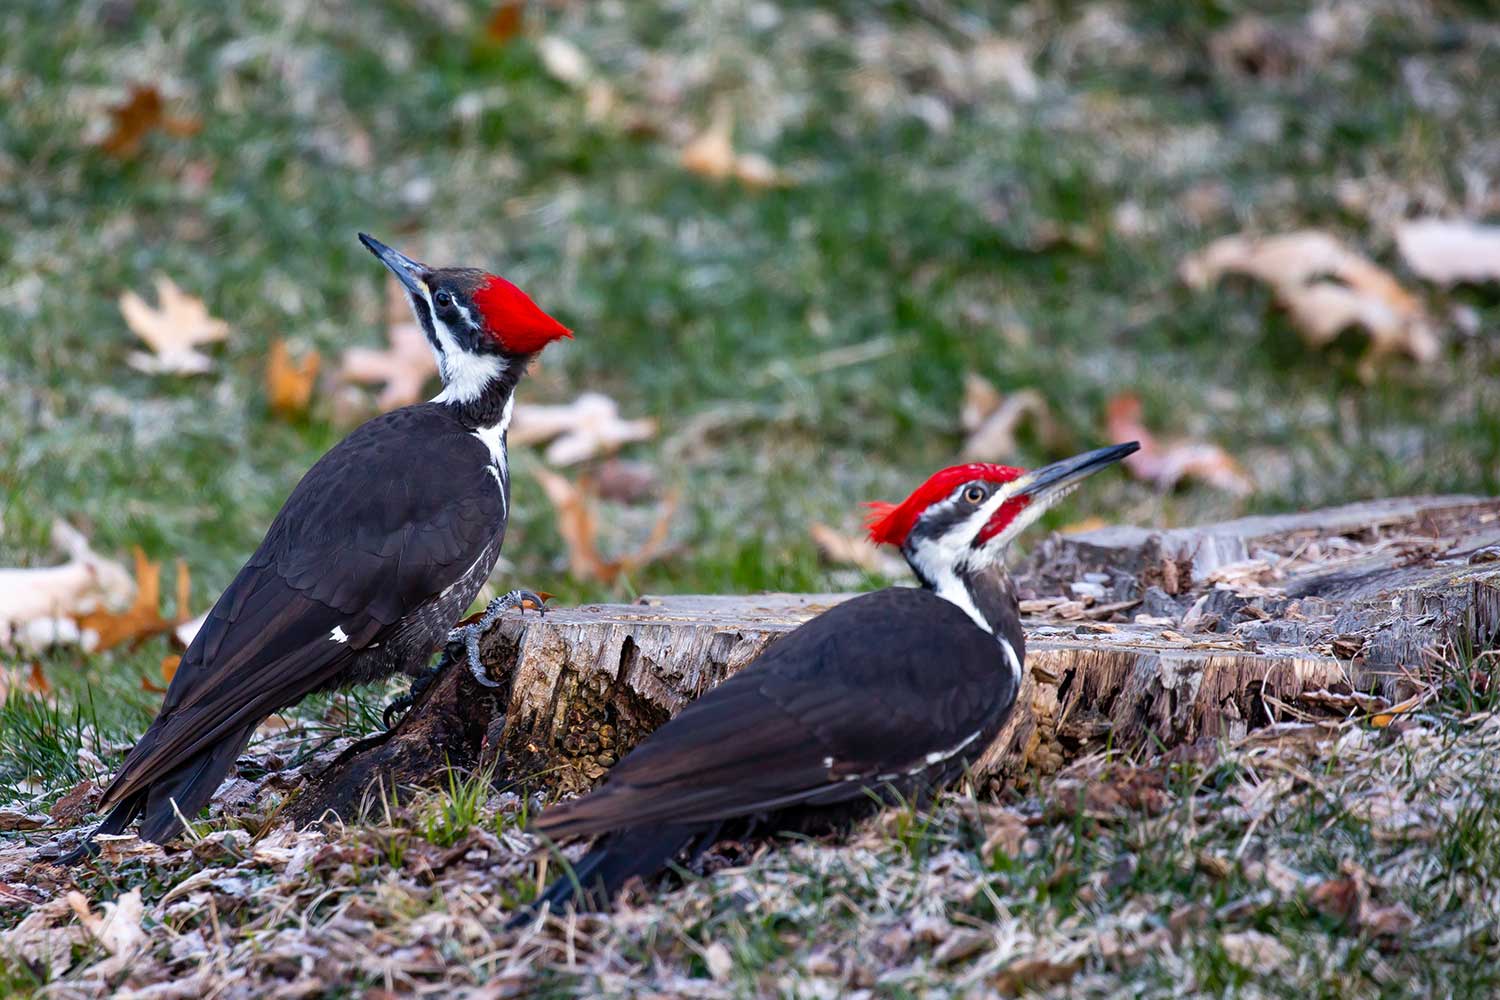 A pileated woodpecker on the edge of a short tree stump and another pileated woodpecker on the ground next to it.